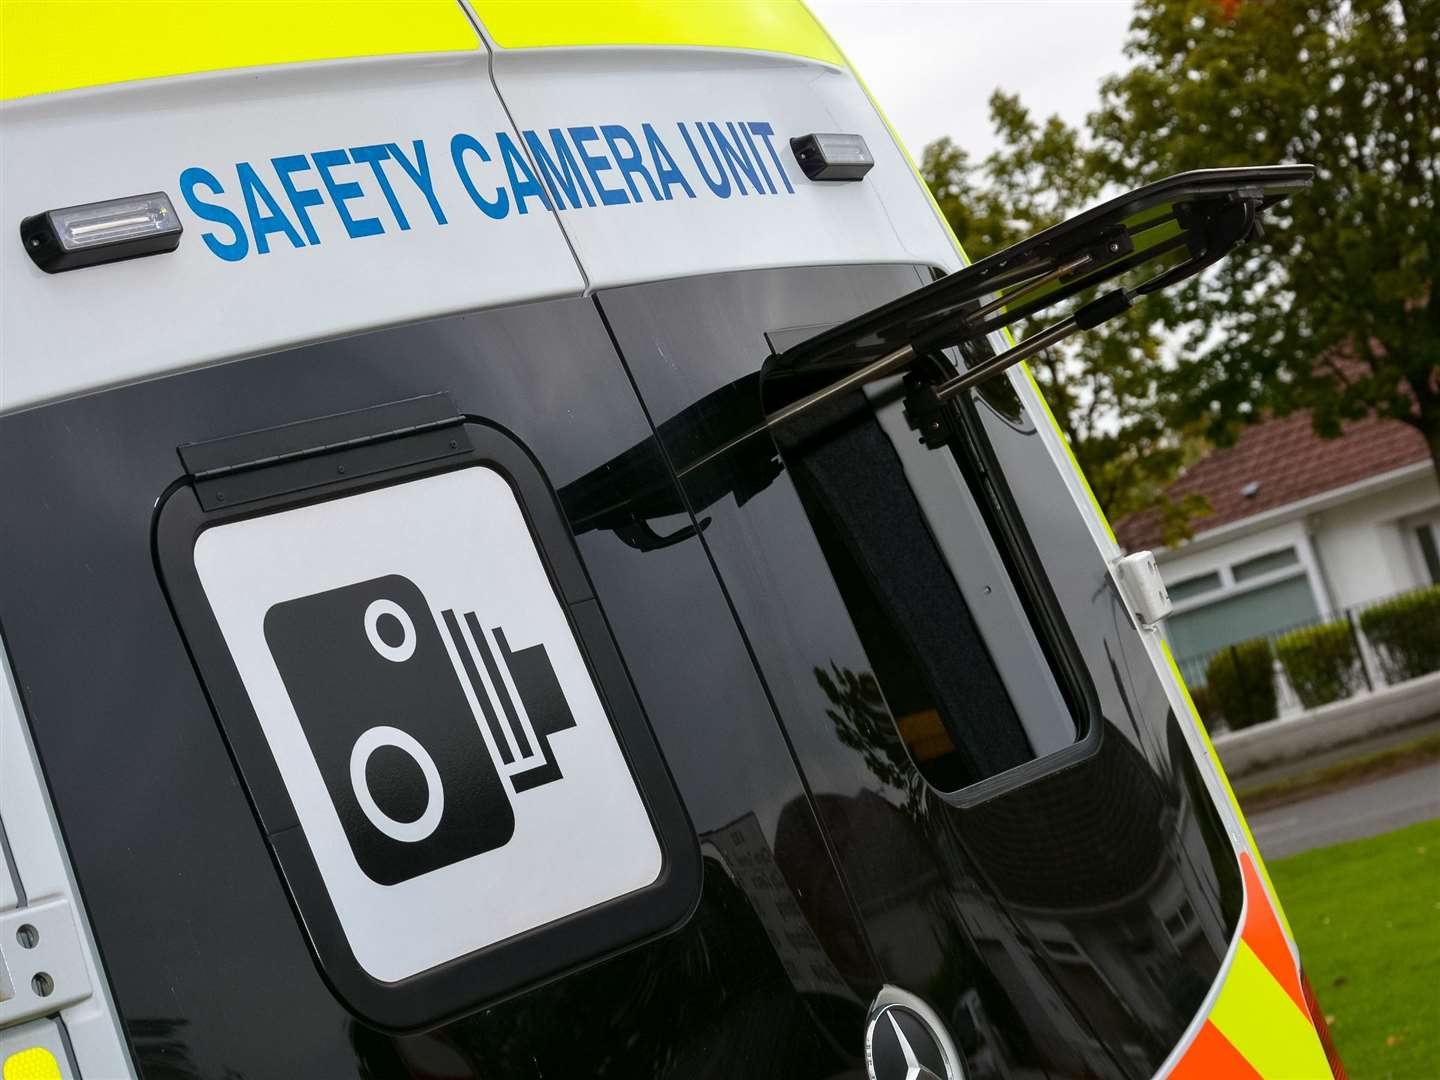 A safety camera unit will take enforcement action at a new location near Bainshole on the A96.